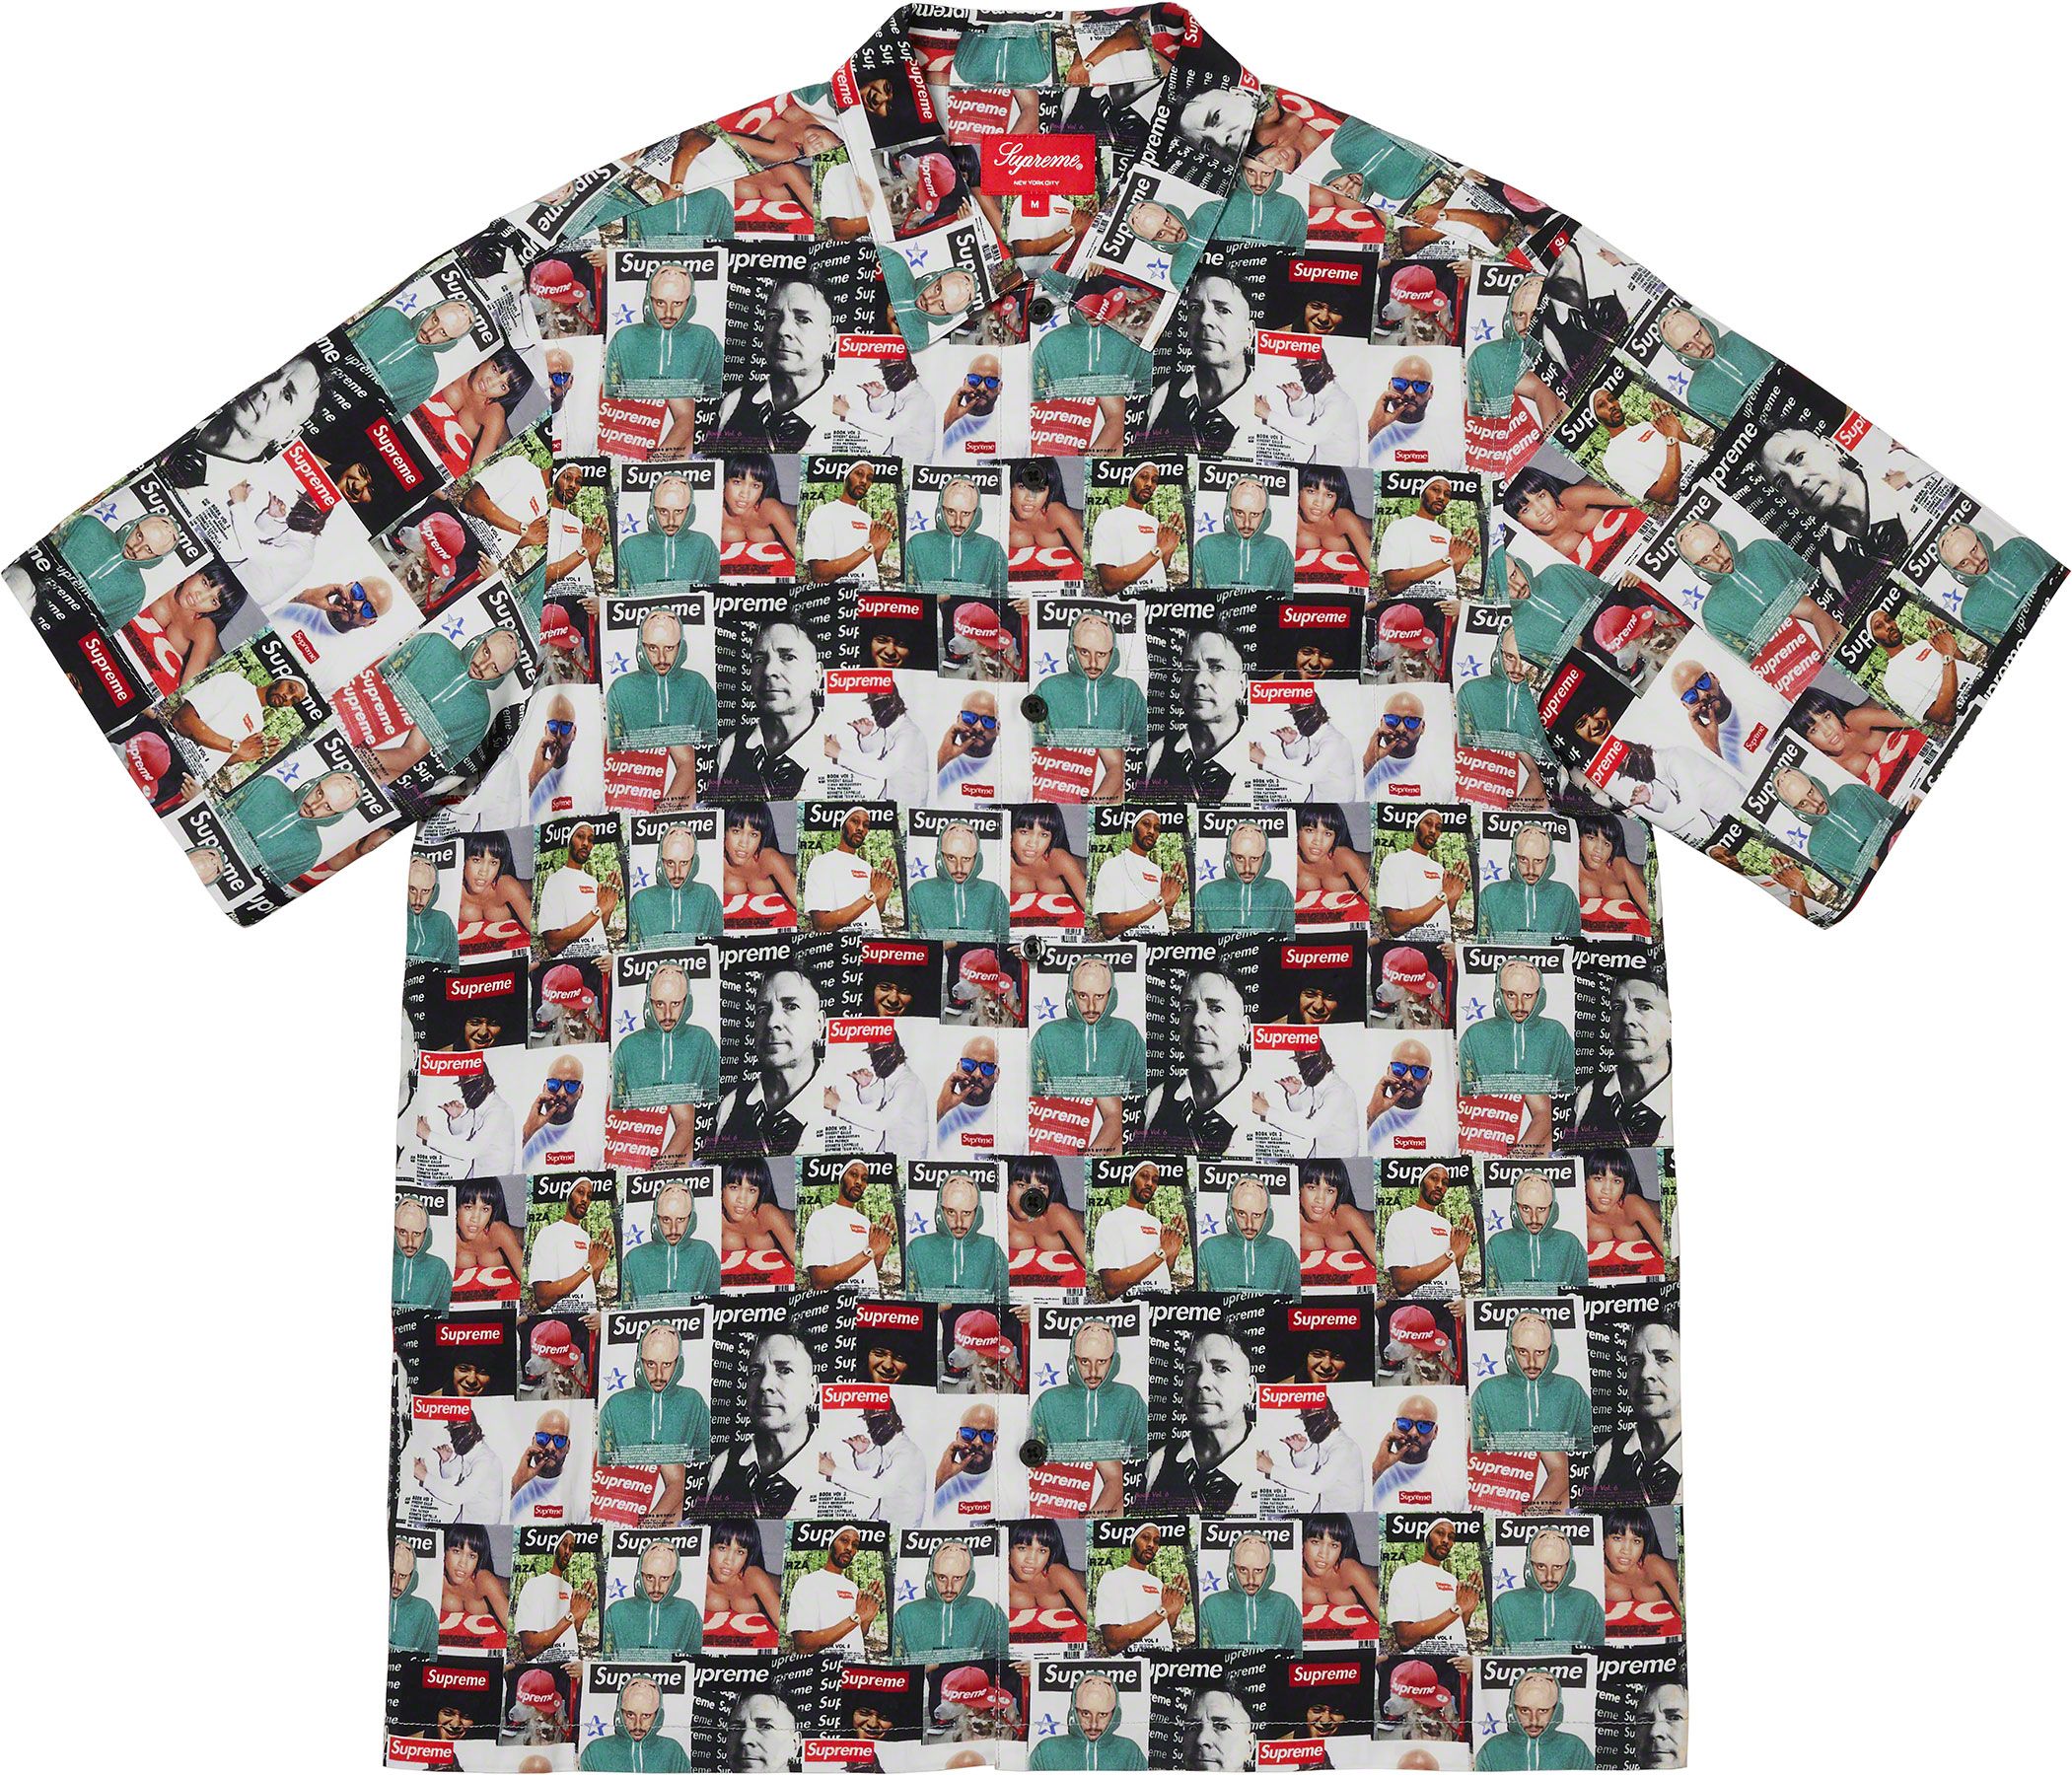 Footy fans, this Supreme shirt is Euros-worthy